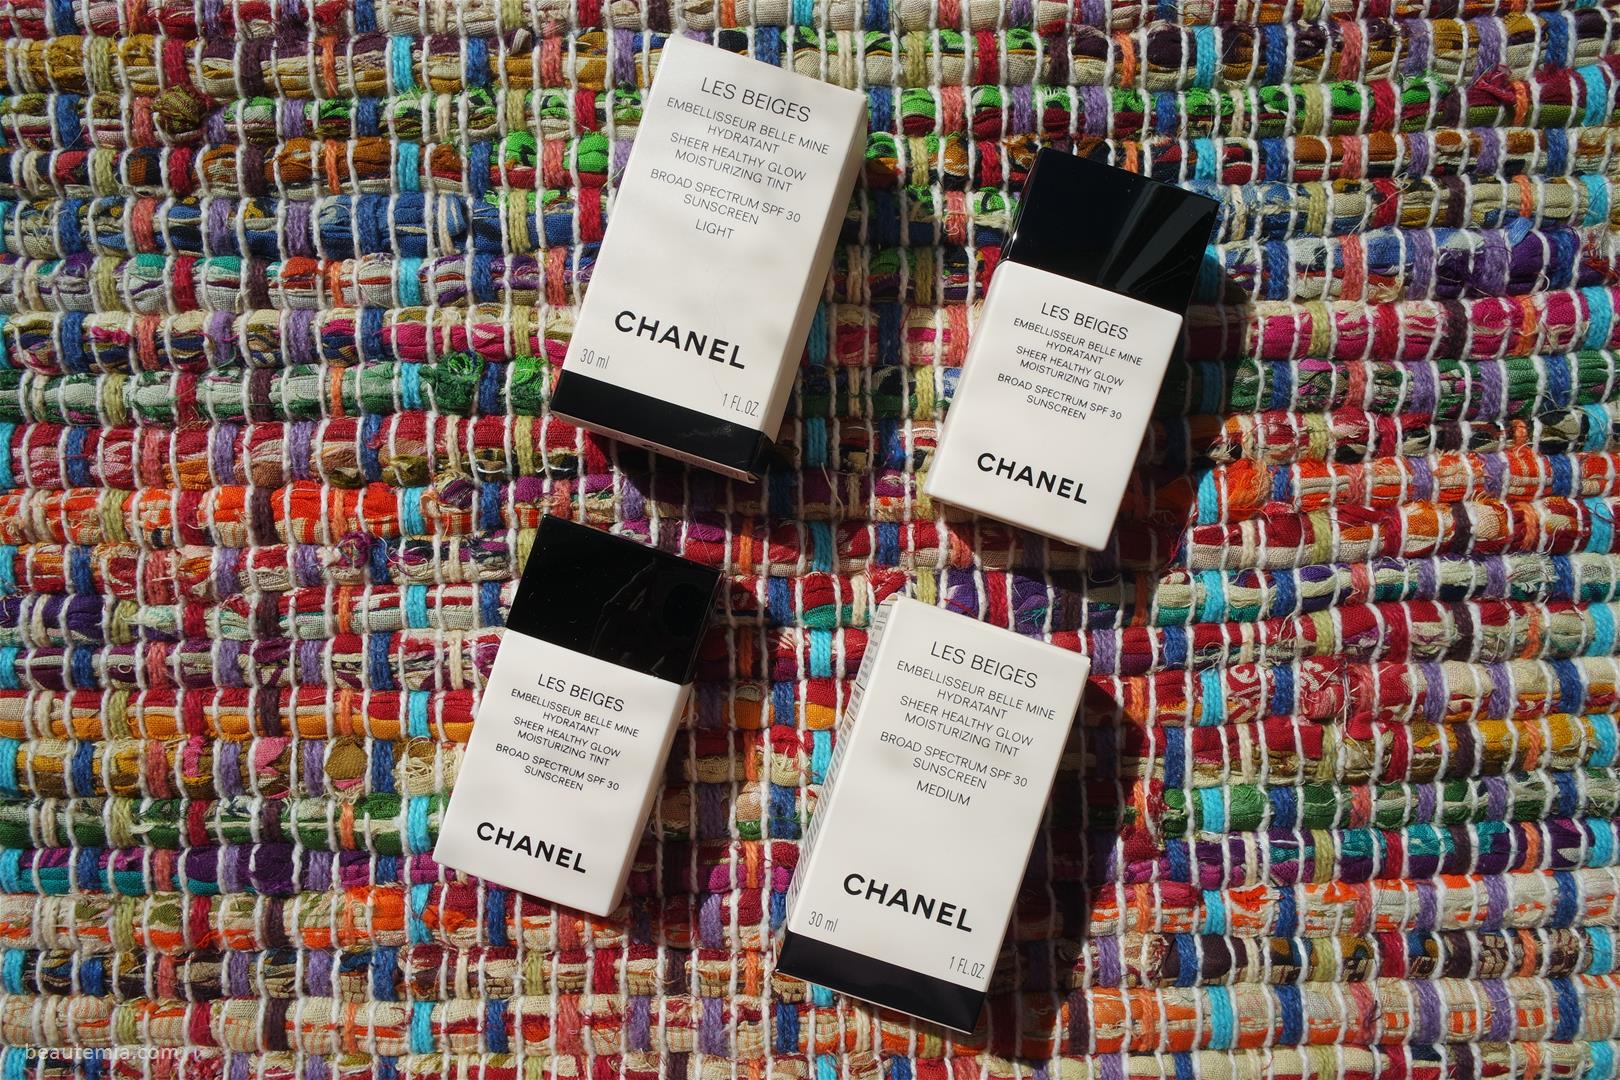 Chanel Review > LES BEIGES Sheer Healthy Glow Moisturizing Tint